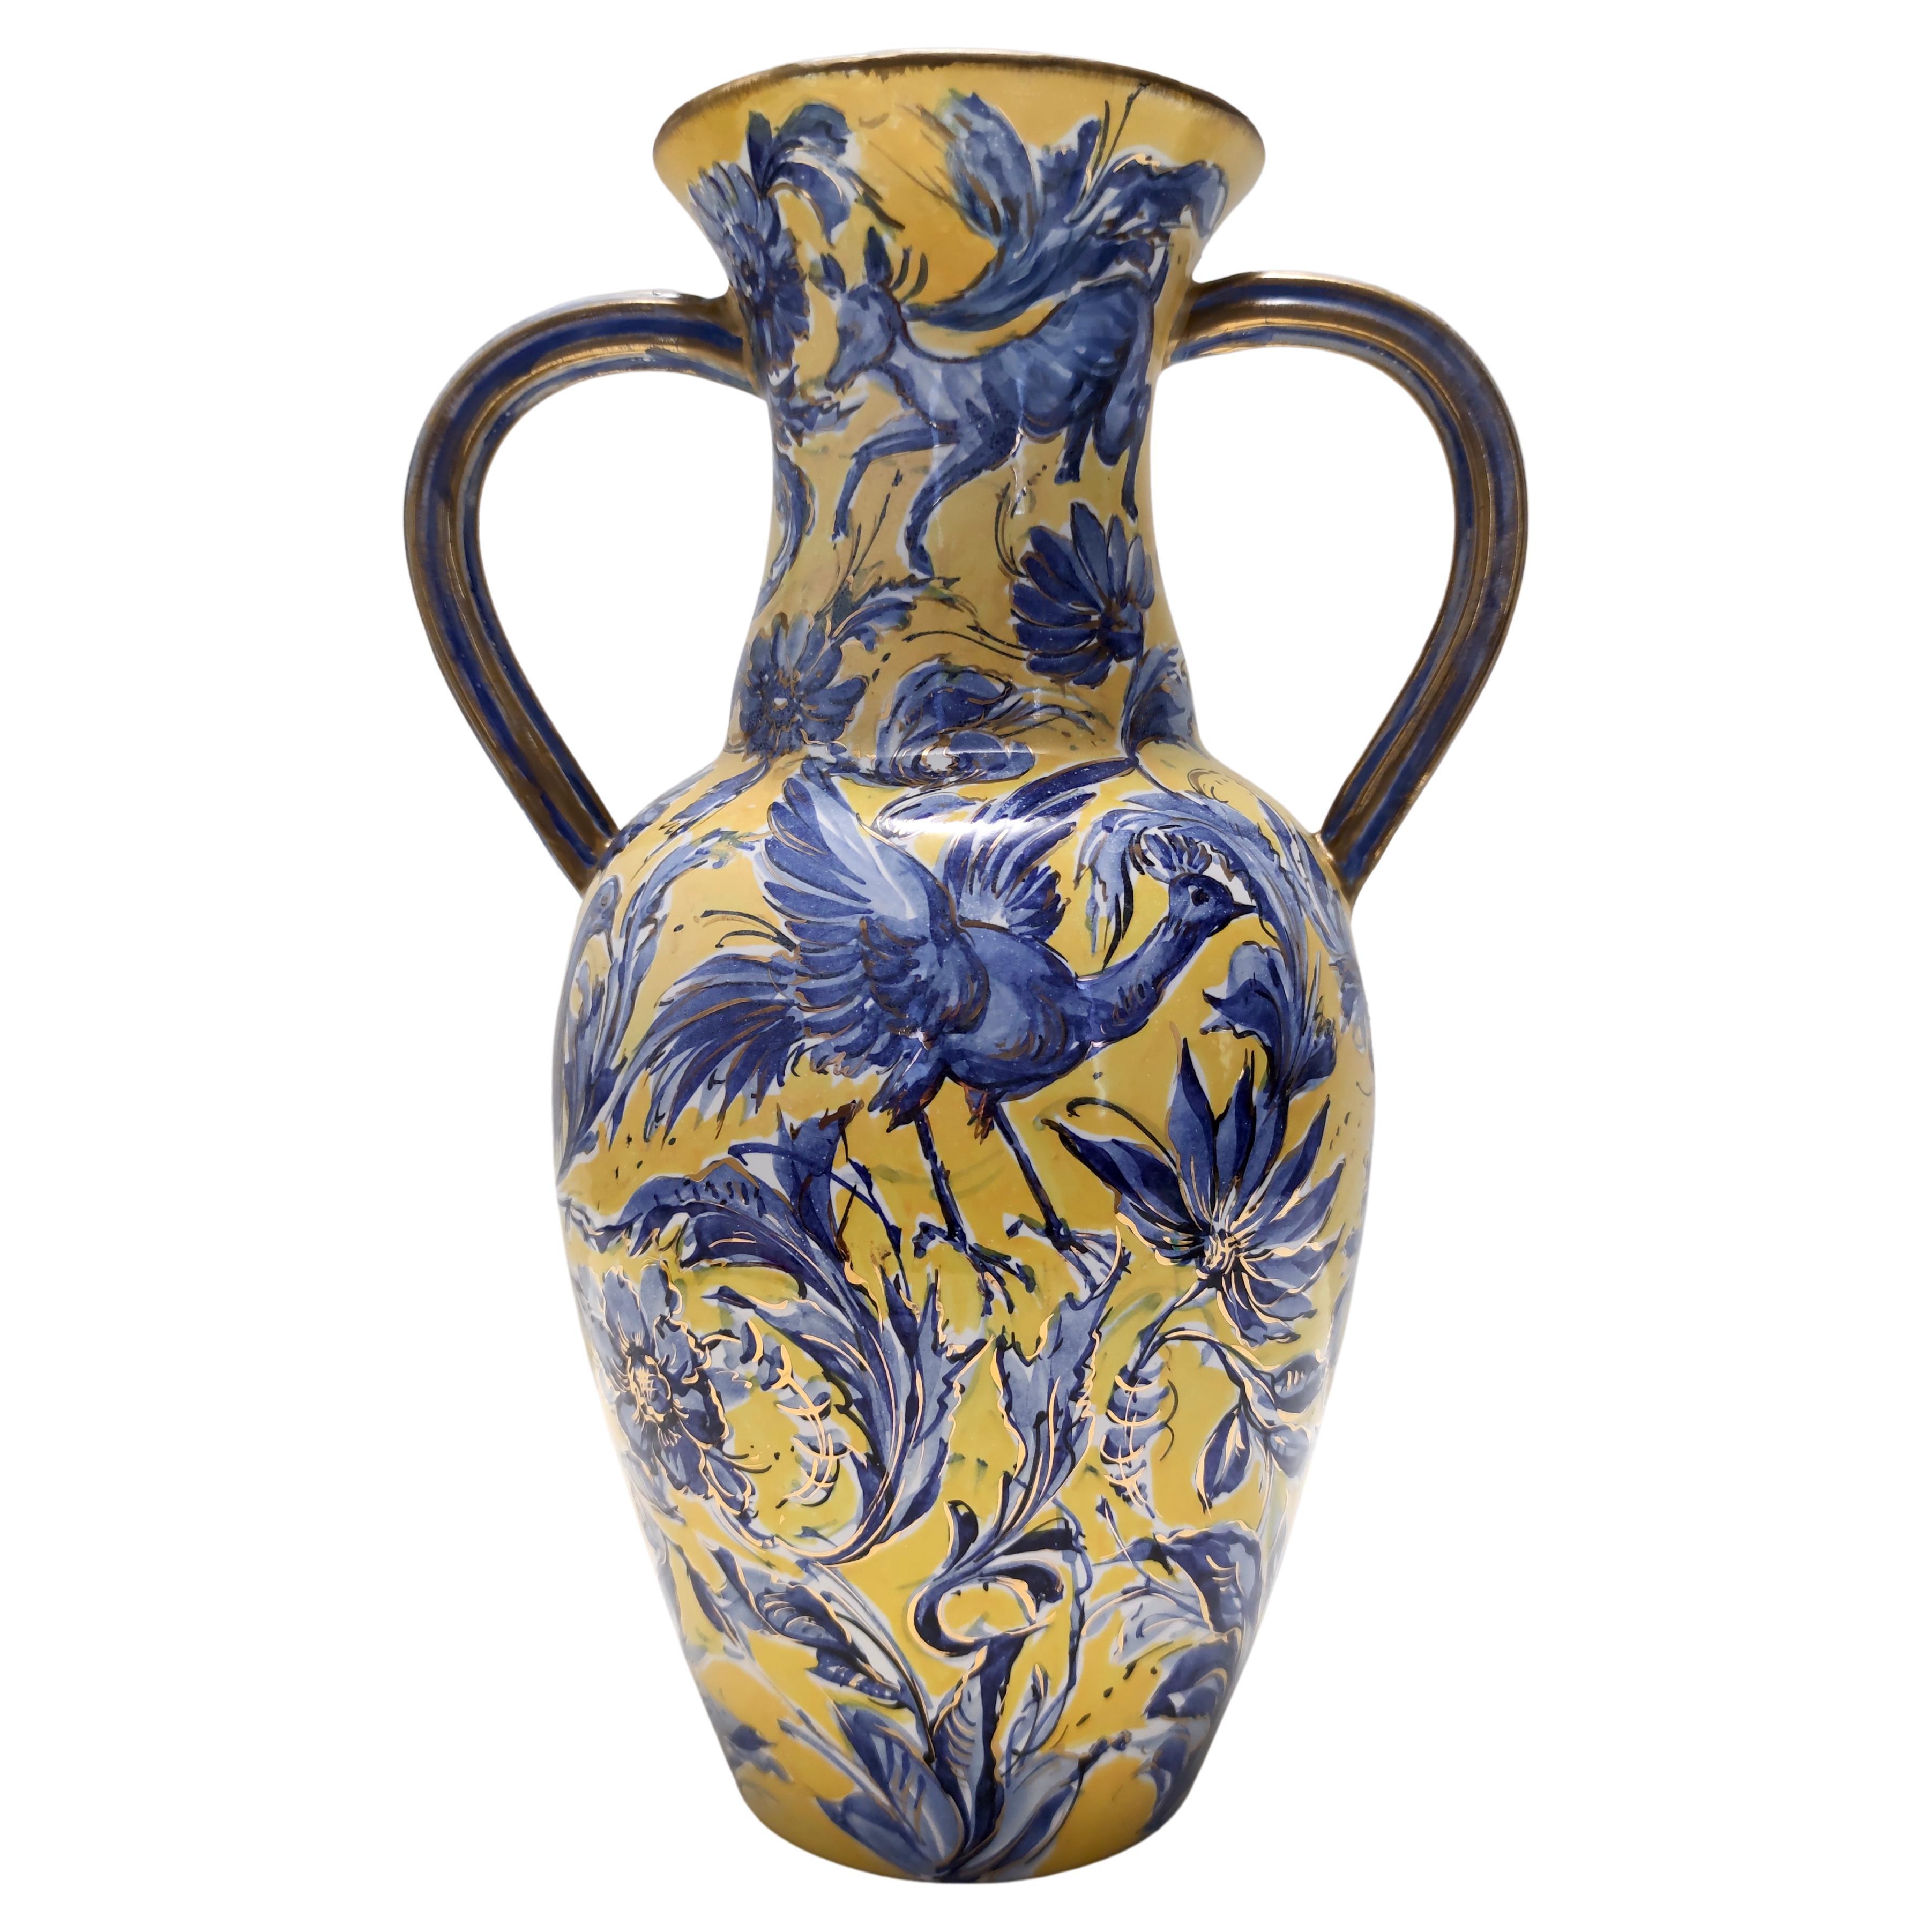 Handmade Yellow and Blue Glazed Ceramic Amphora Vase by Zulimo Aretini, Italy For Sale